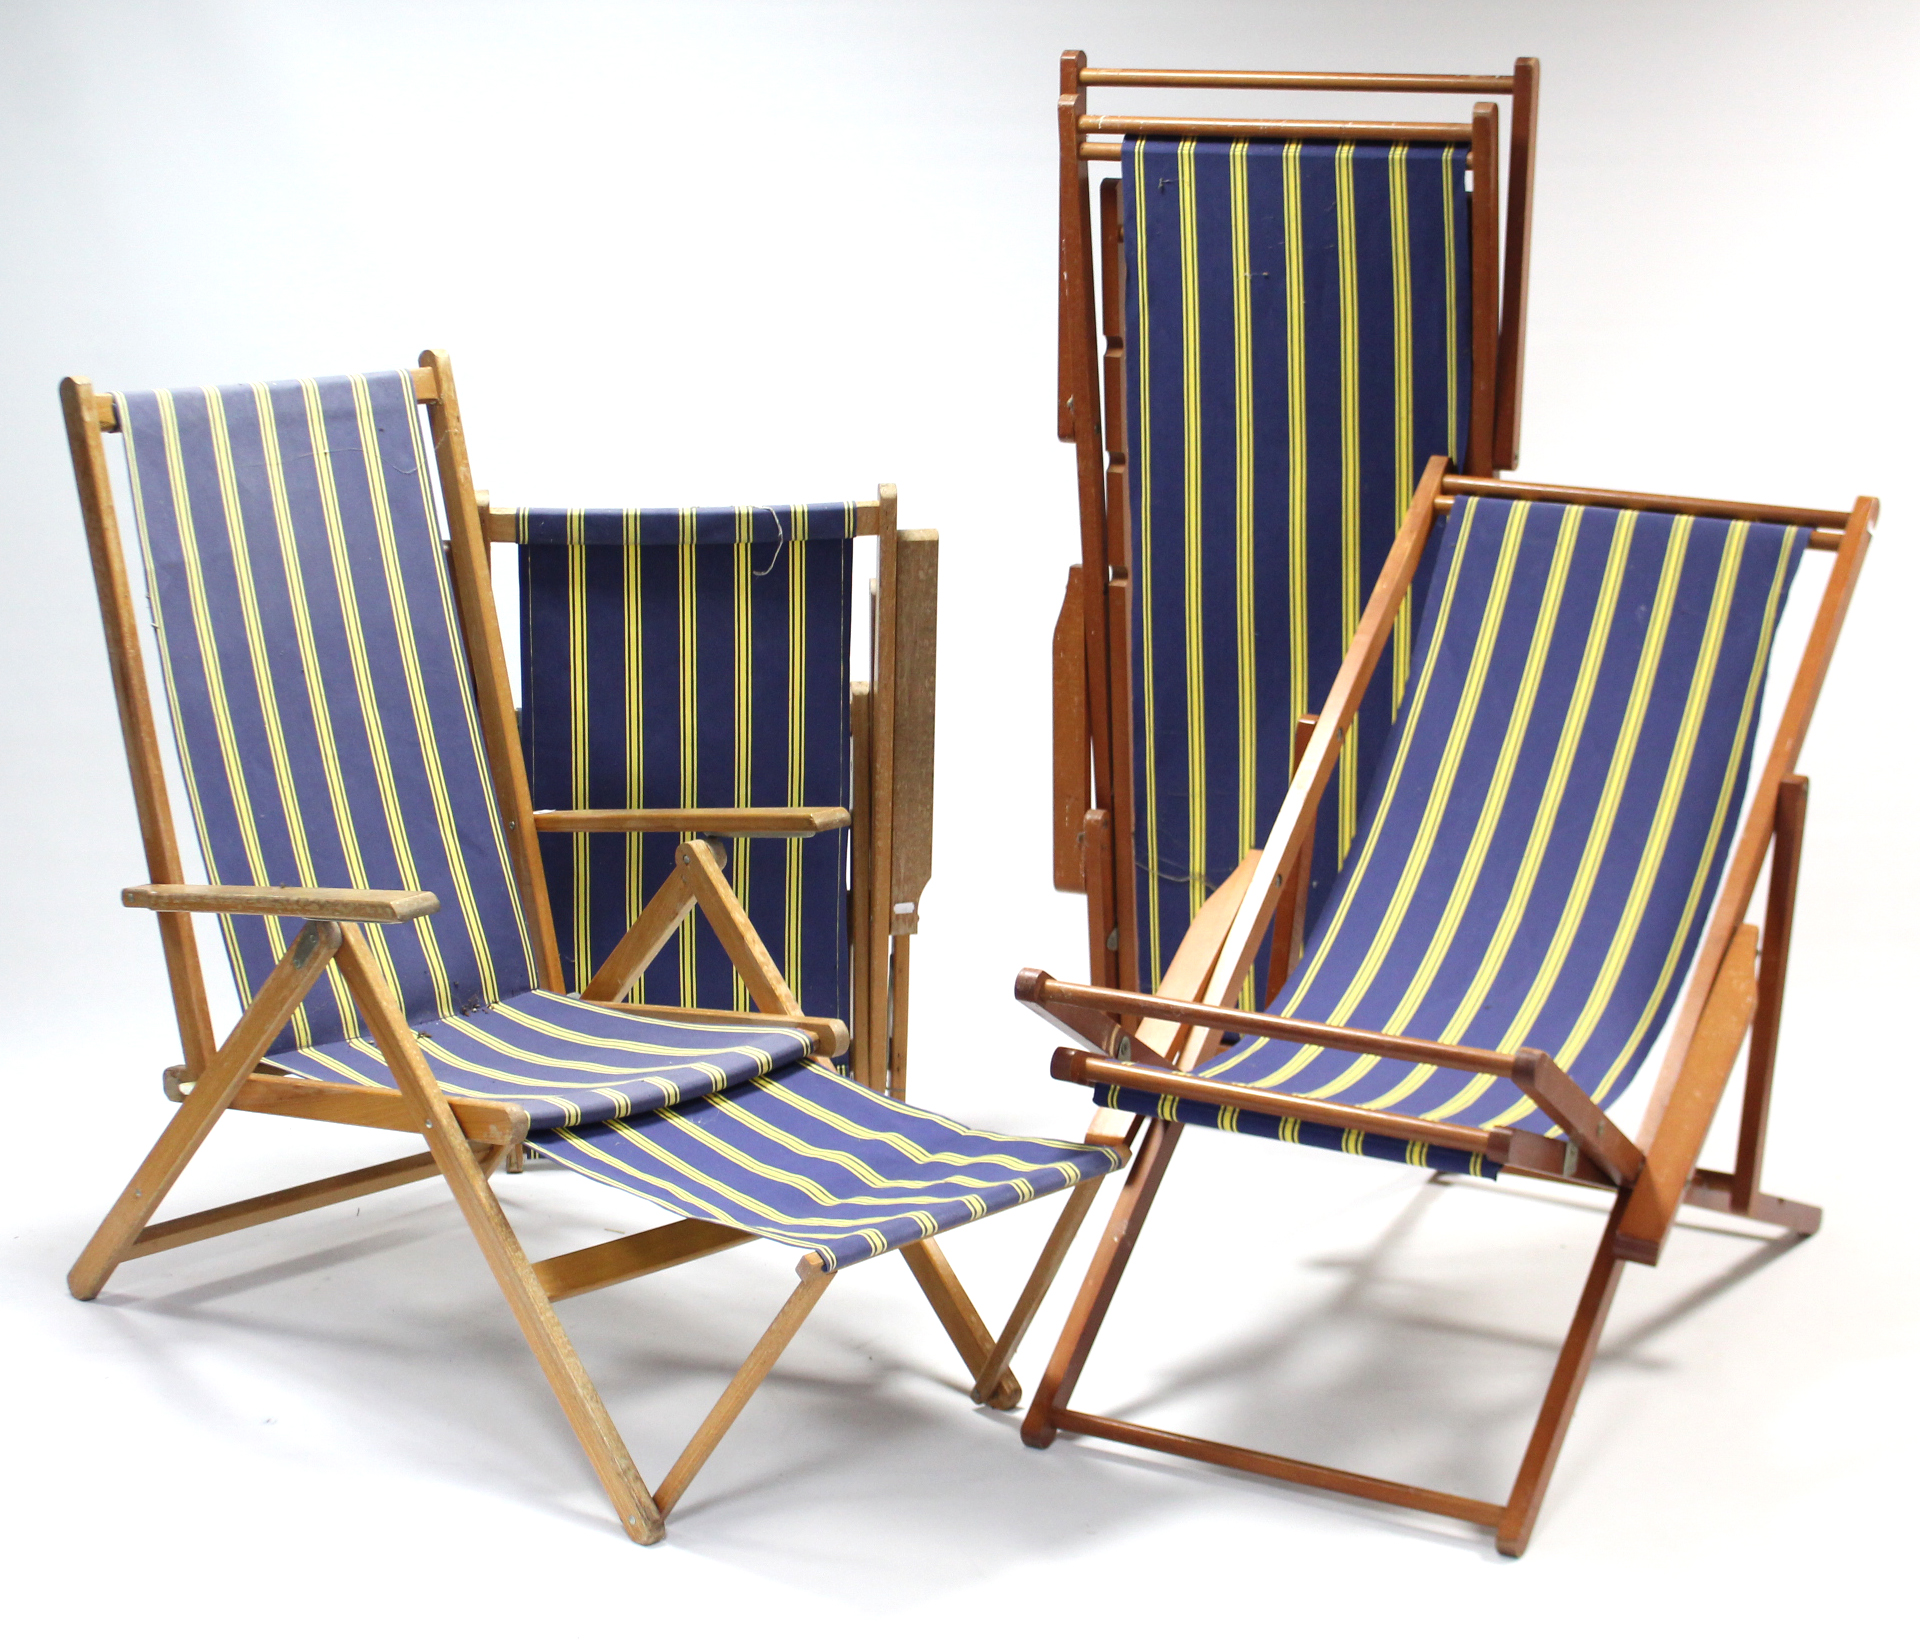 Two pairs of wooden frame deckchairs.